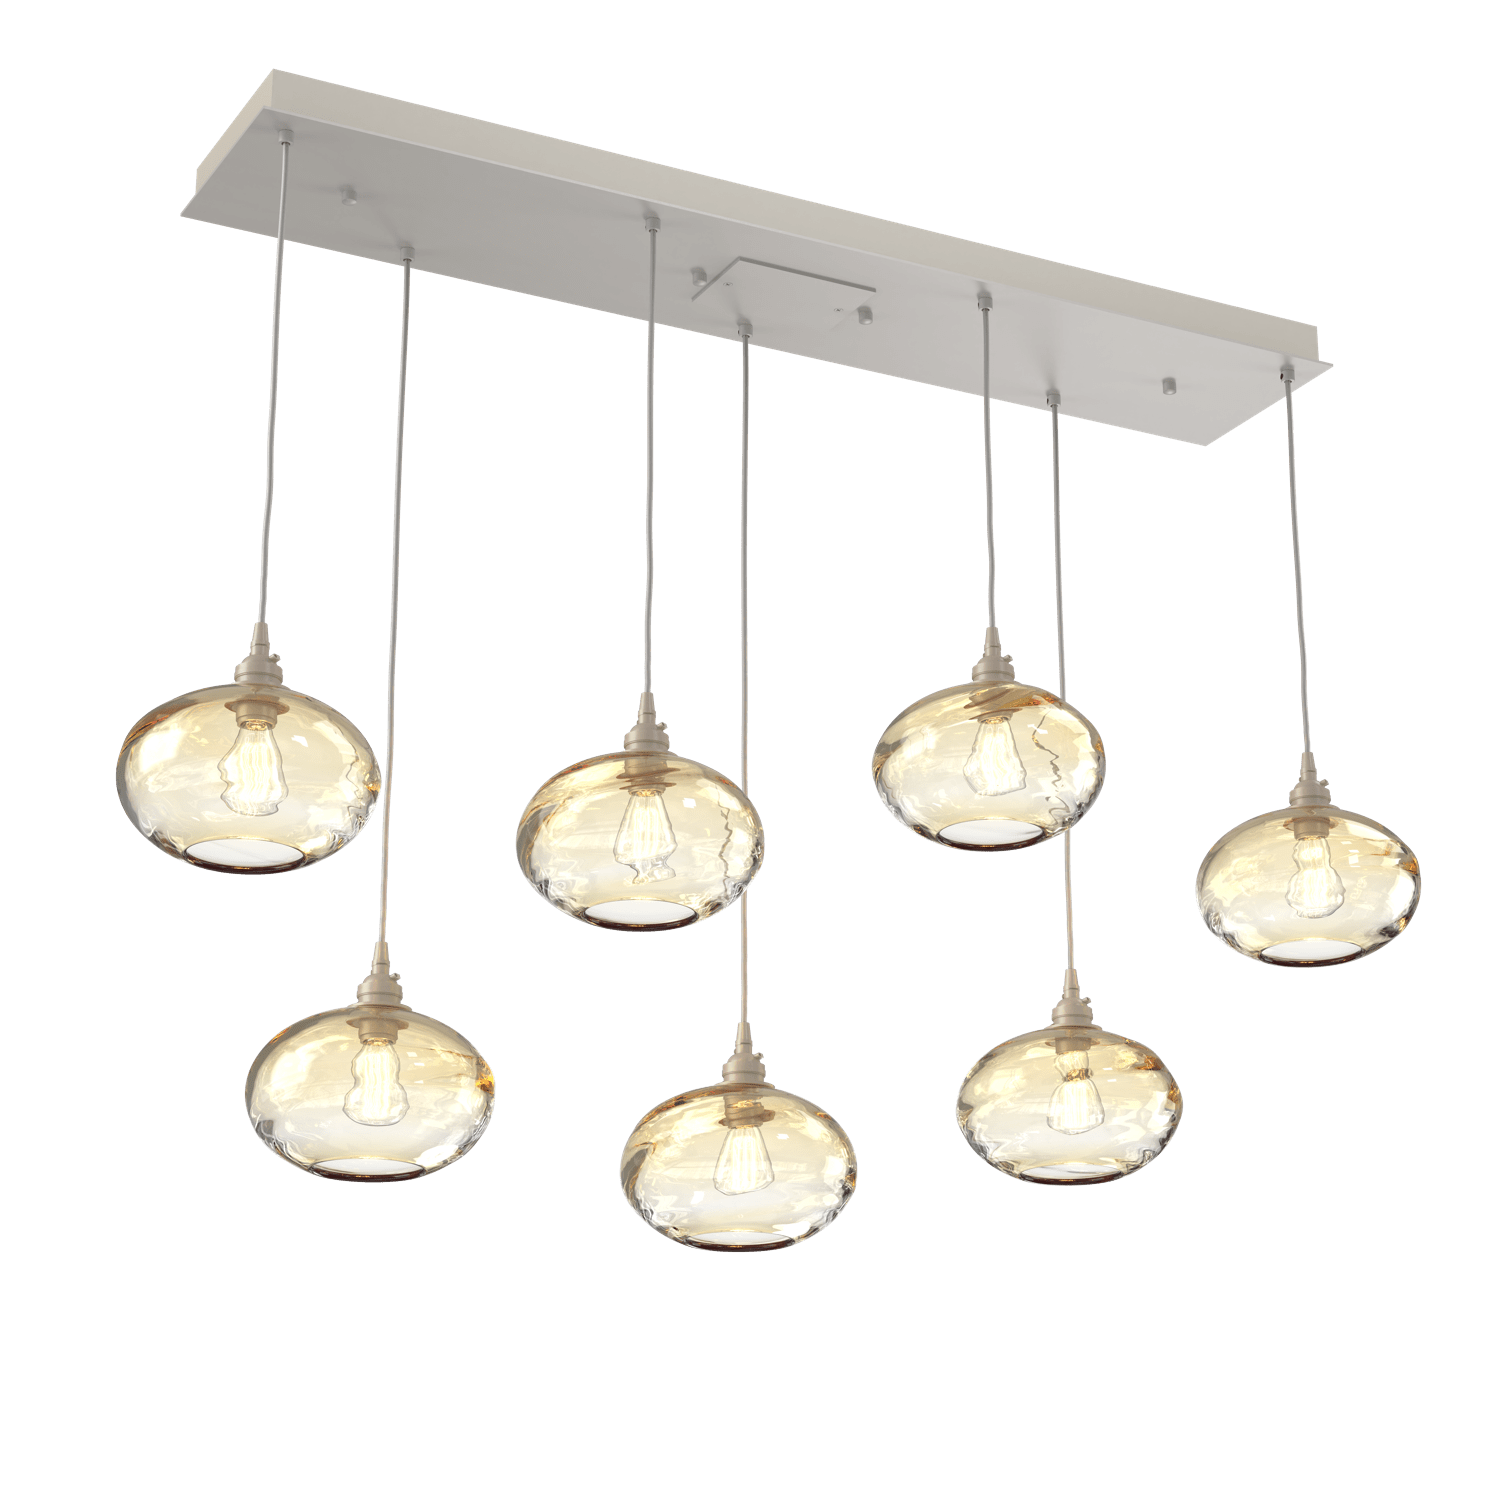 PLB0036-07-BS-OA-Hammerton-Studio-Optic-Blown-Glass-Coppa-7-light-linear-pendant-chandelier-with-metallic-beige-silver-finish-and-optic-amber-blown-glass-shades-and-incandescent-lamping